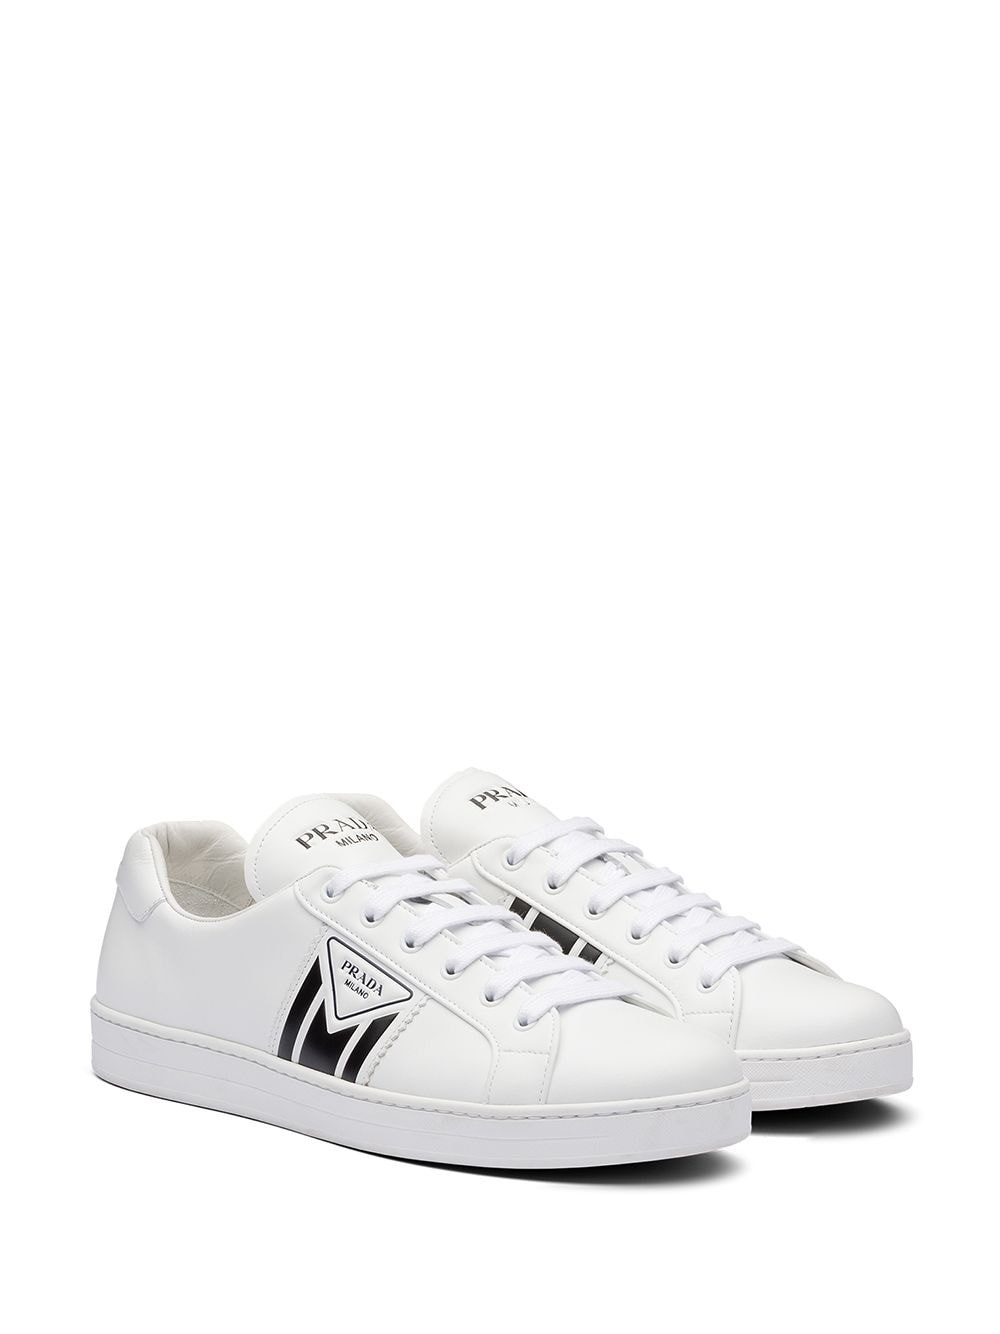 Prada Sneakers Available On Montiboutique Com